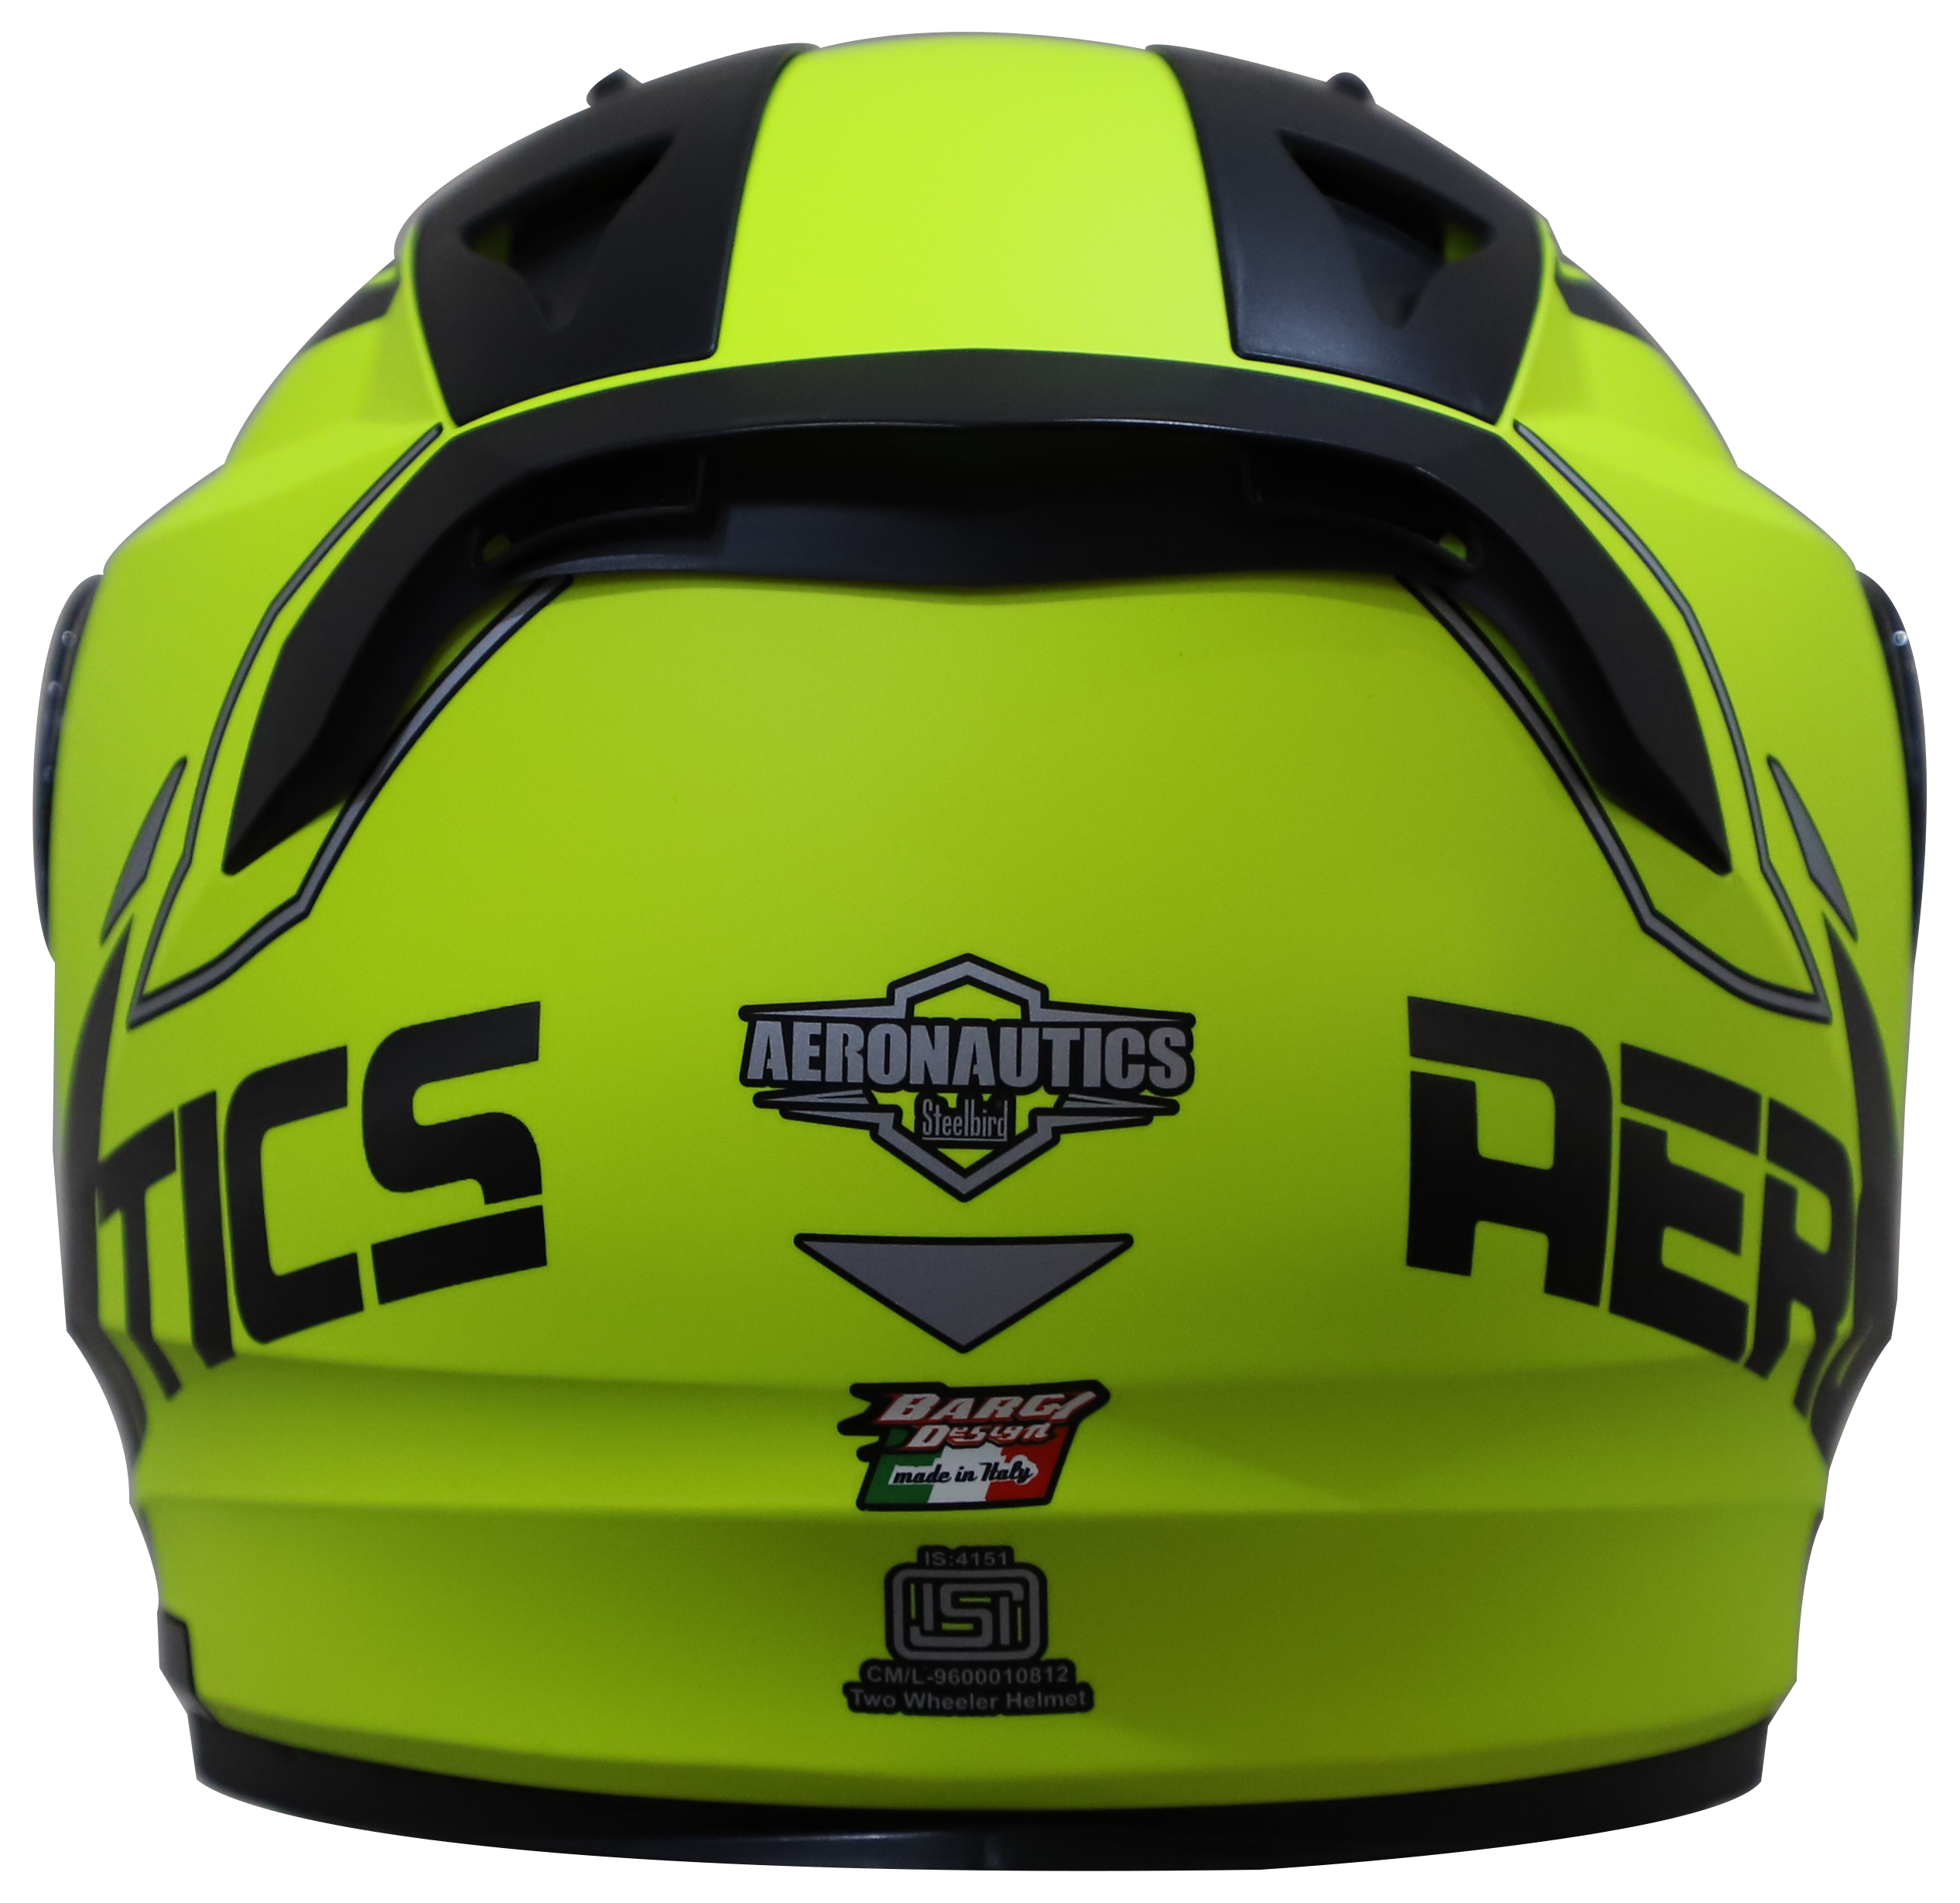 SA-1 RTW GLOSSY FLUO NEON WITH WHITE (FITTED WITH CLEAR VISOR EXTRA SMOKE VISOR FREE)